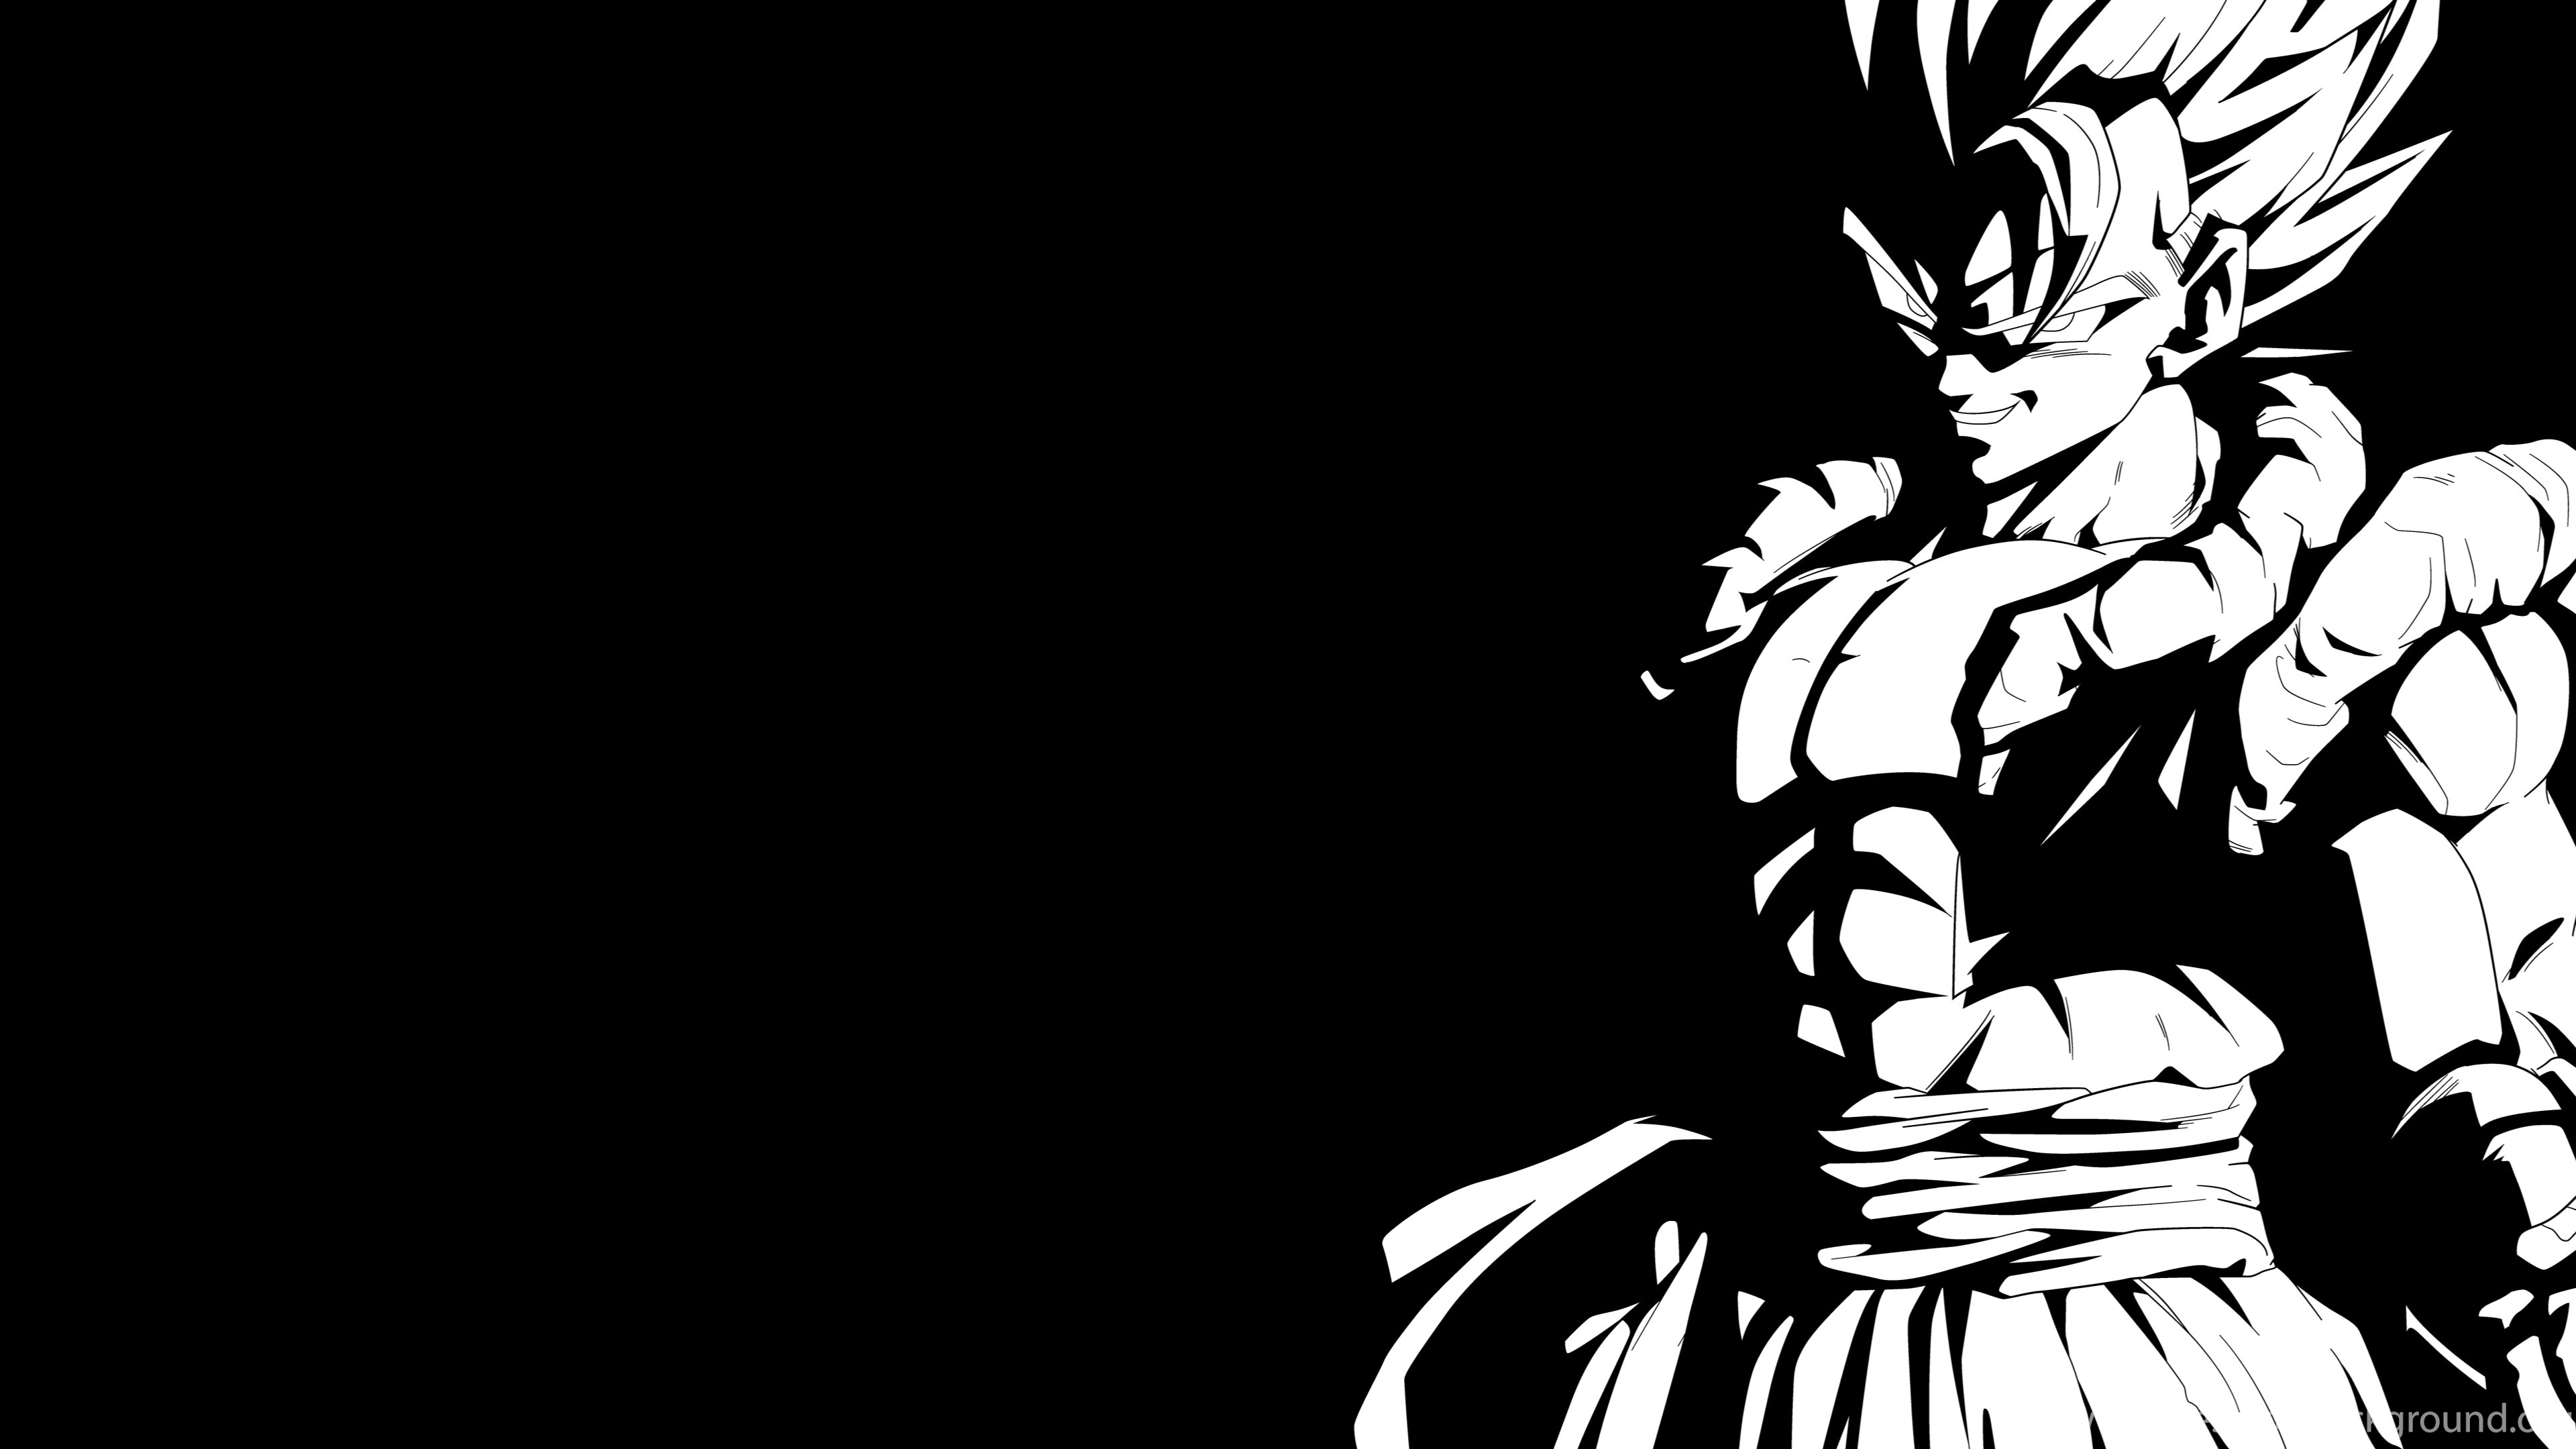 Super Gogeta Black And White 4K Wallpaper By RayzorBlade189 On